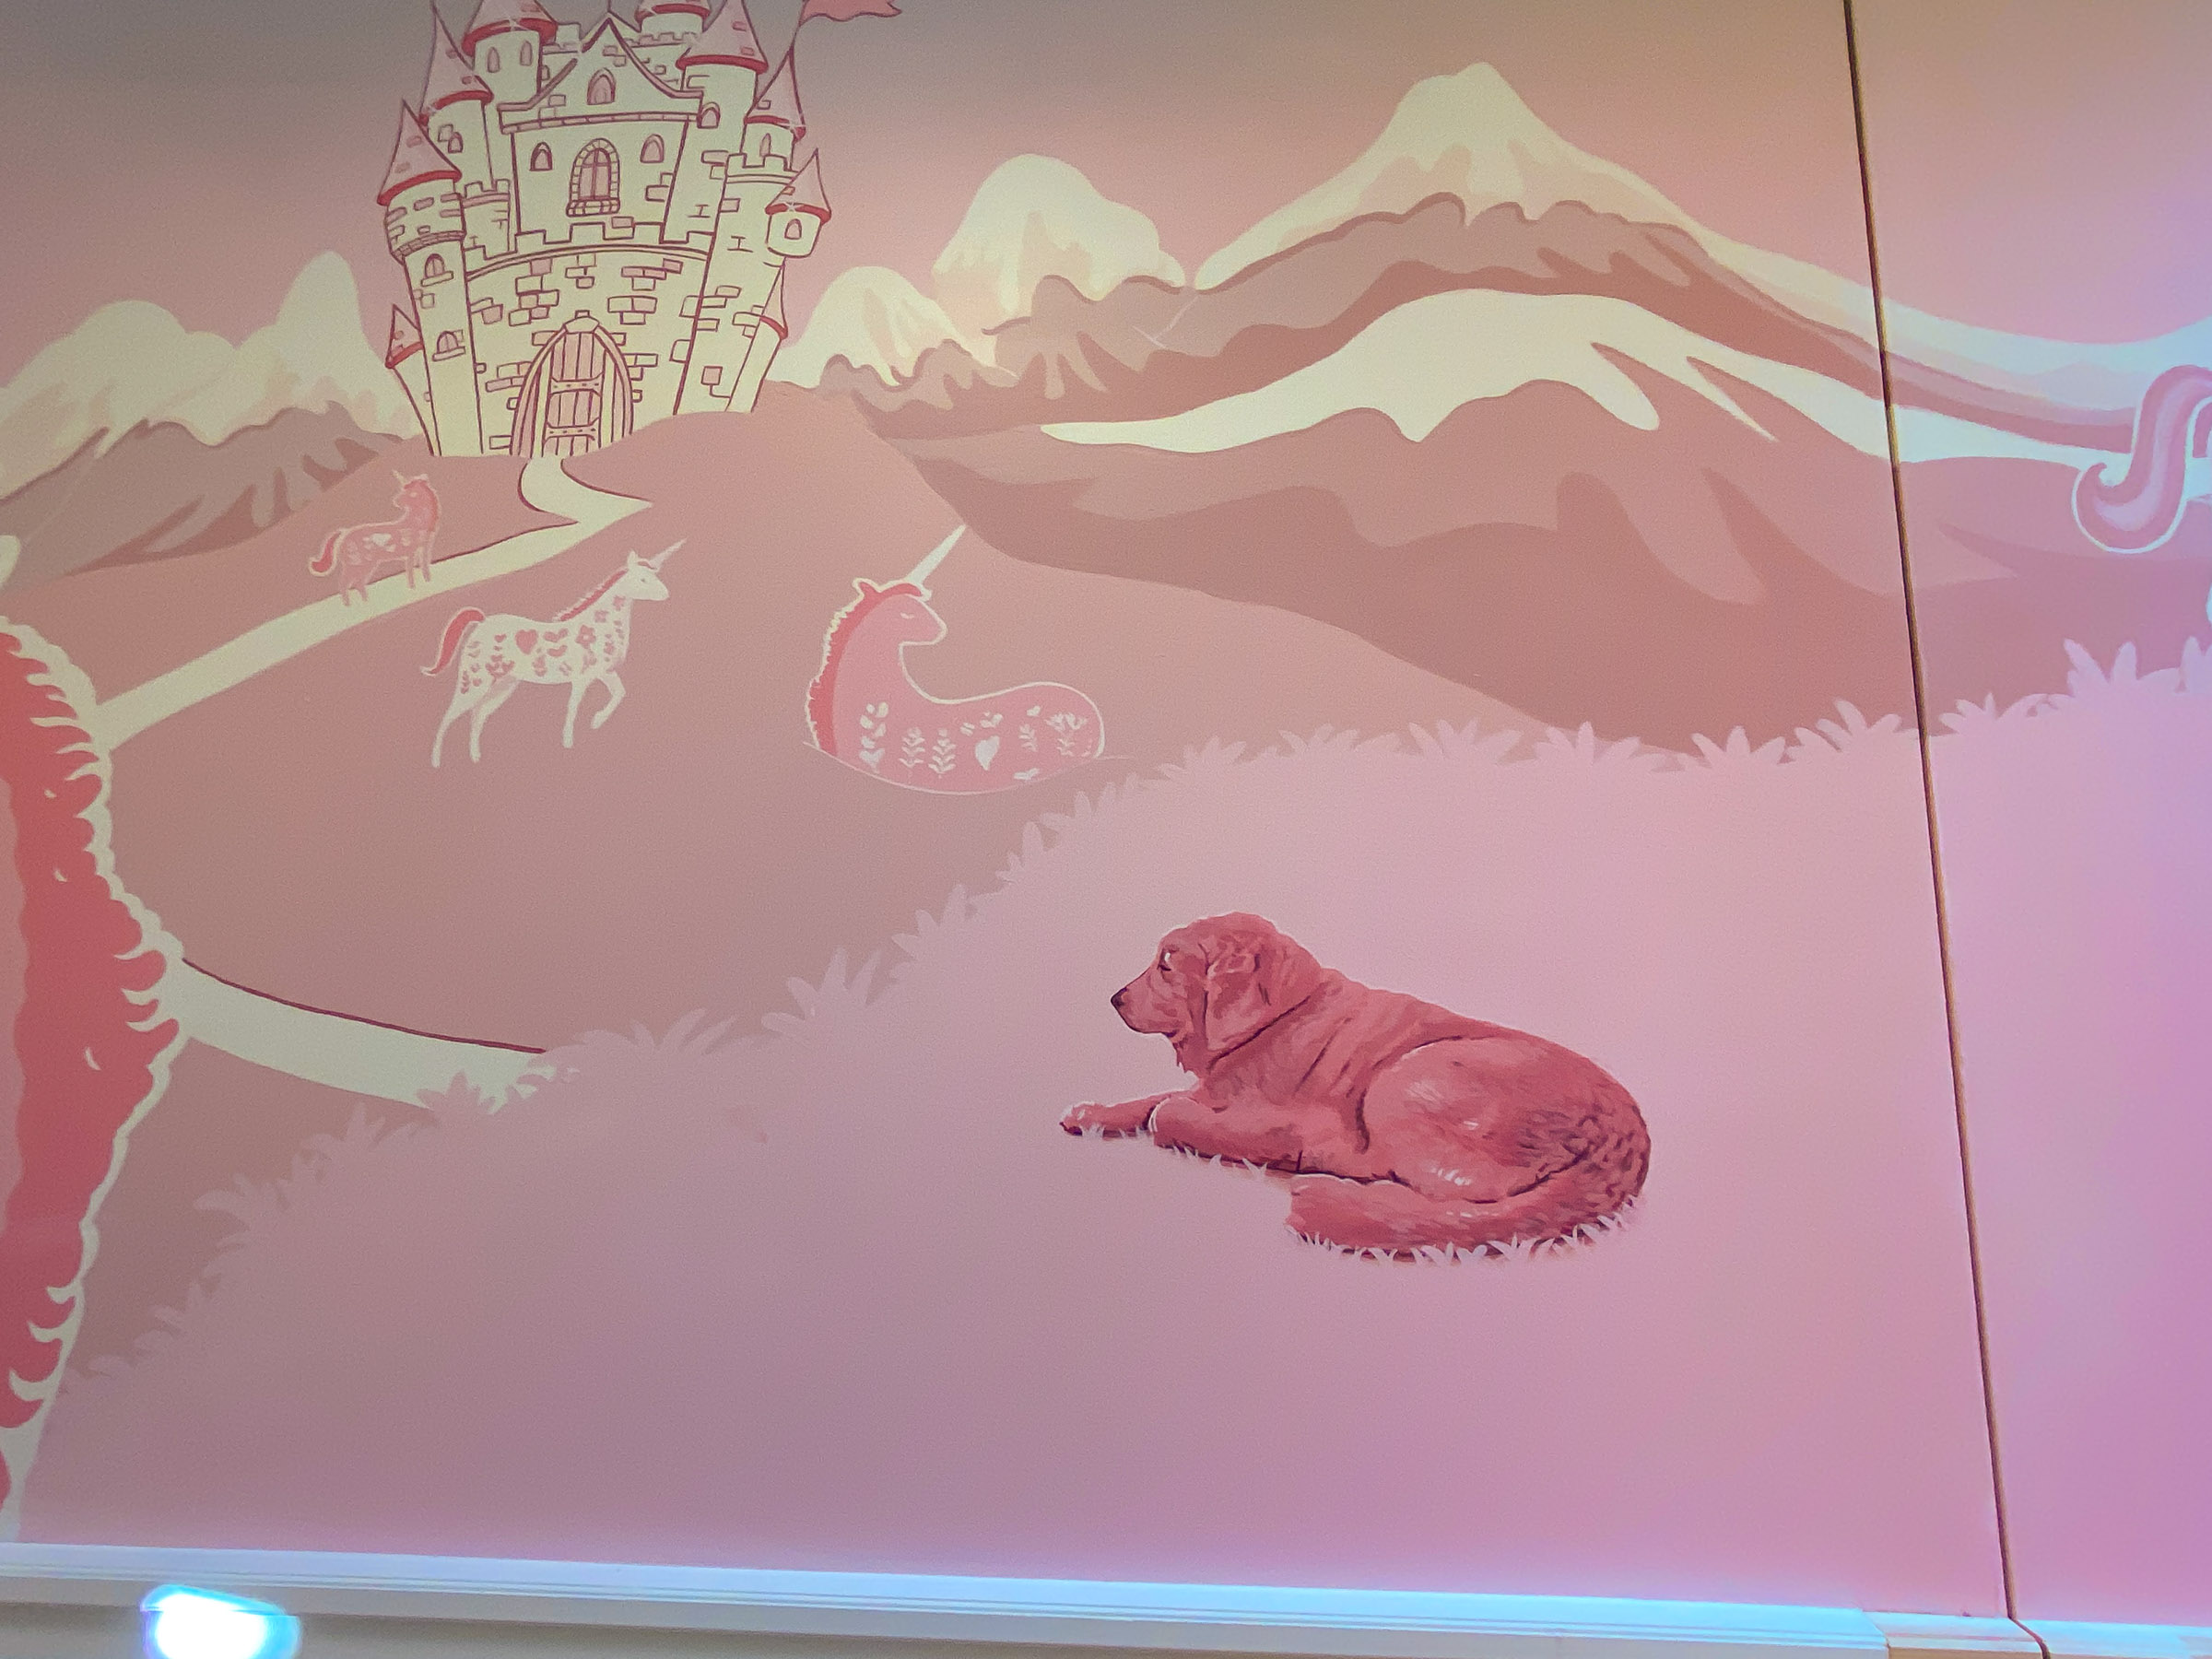 Another of their pets captured in this lovely mural, making the artwork very personal and family friendly